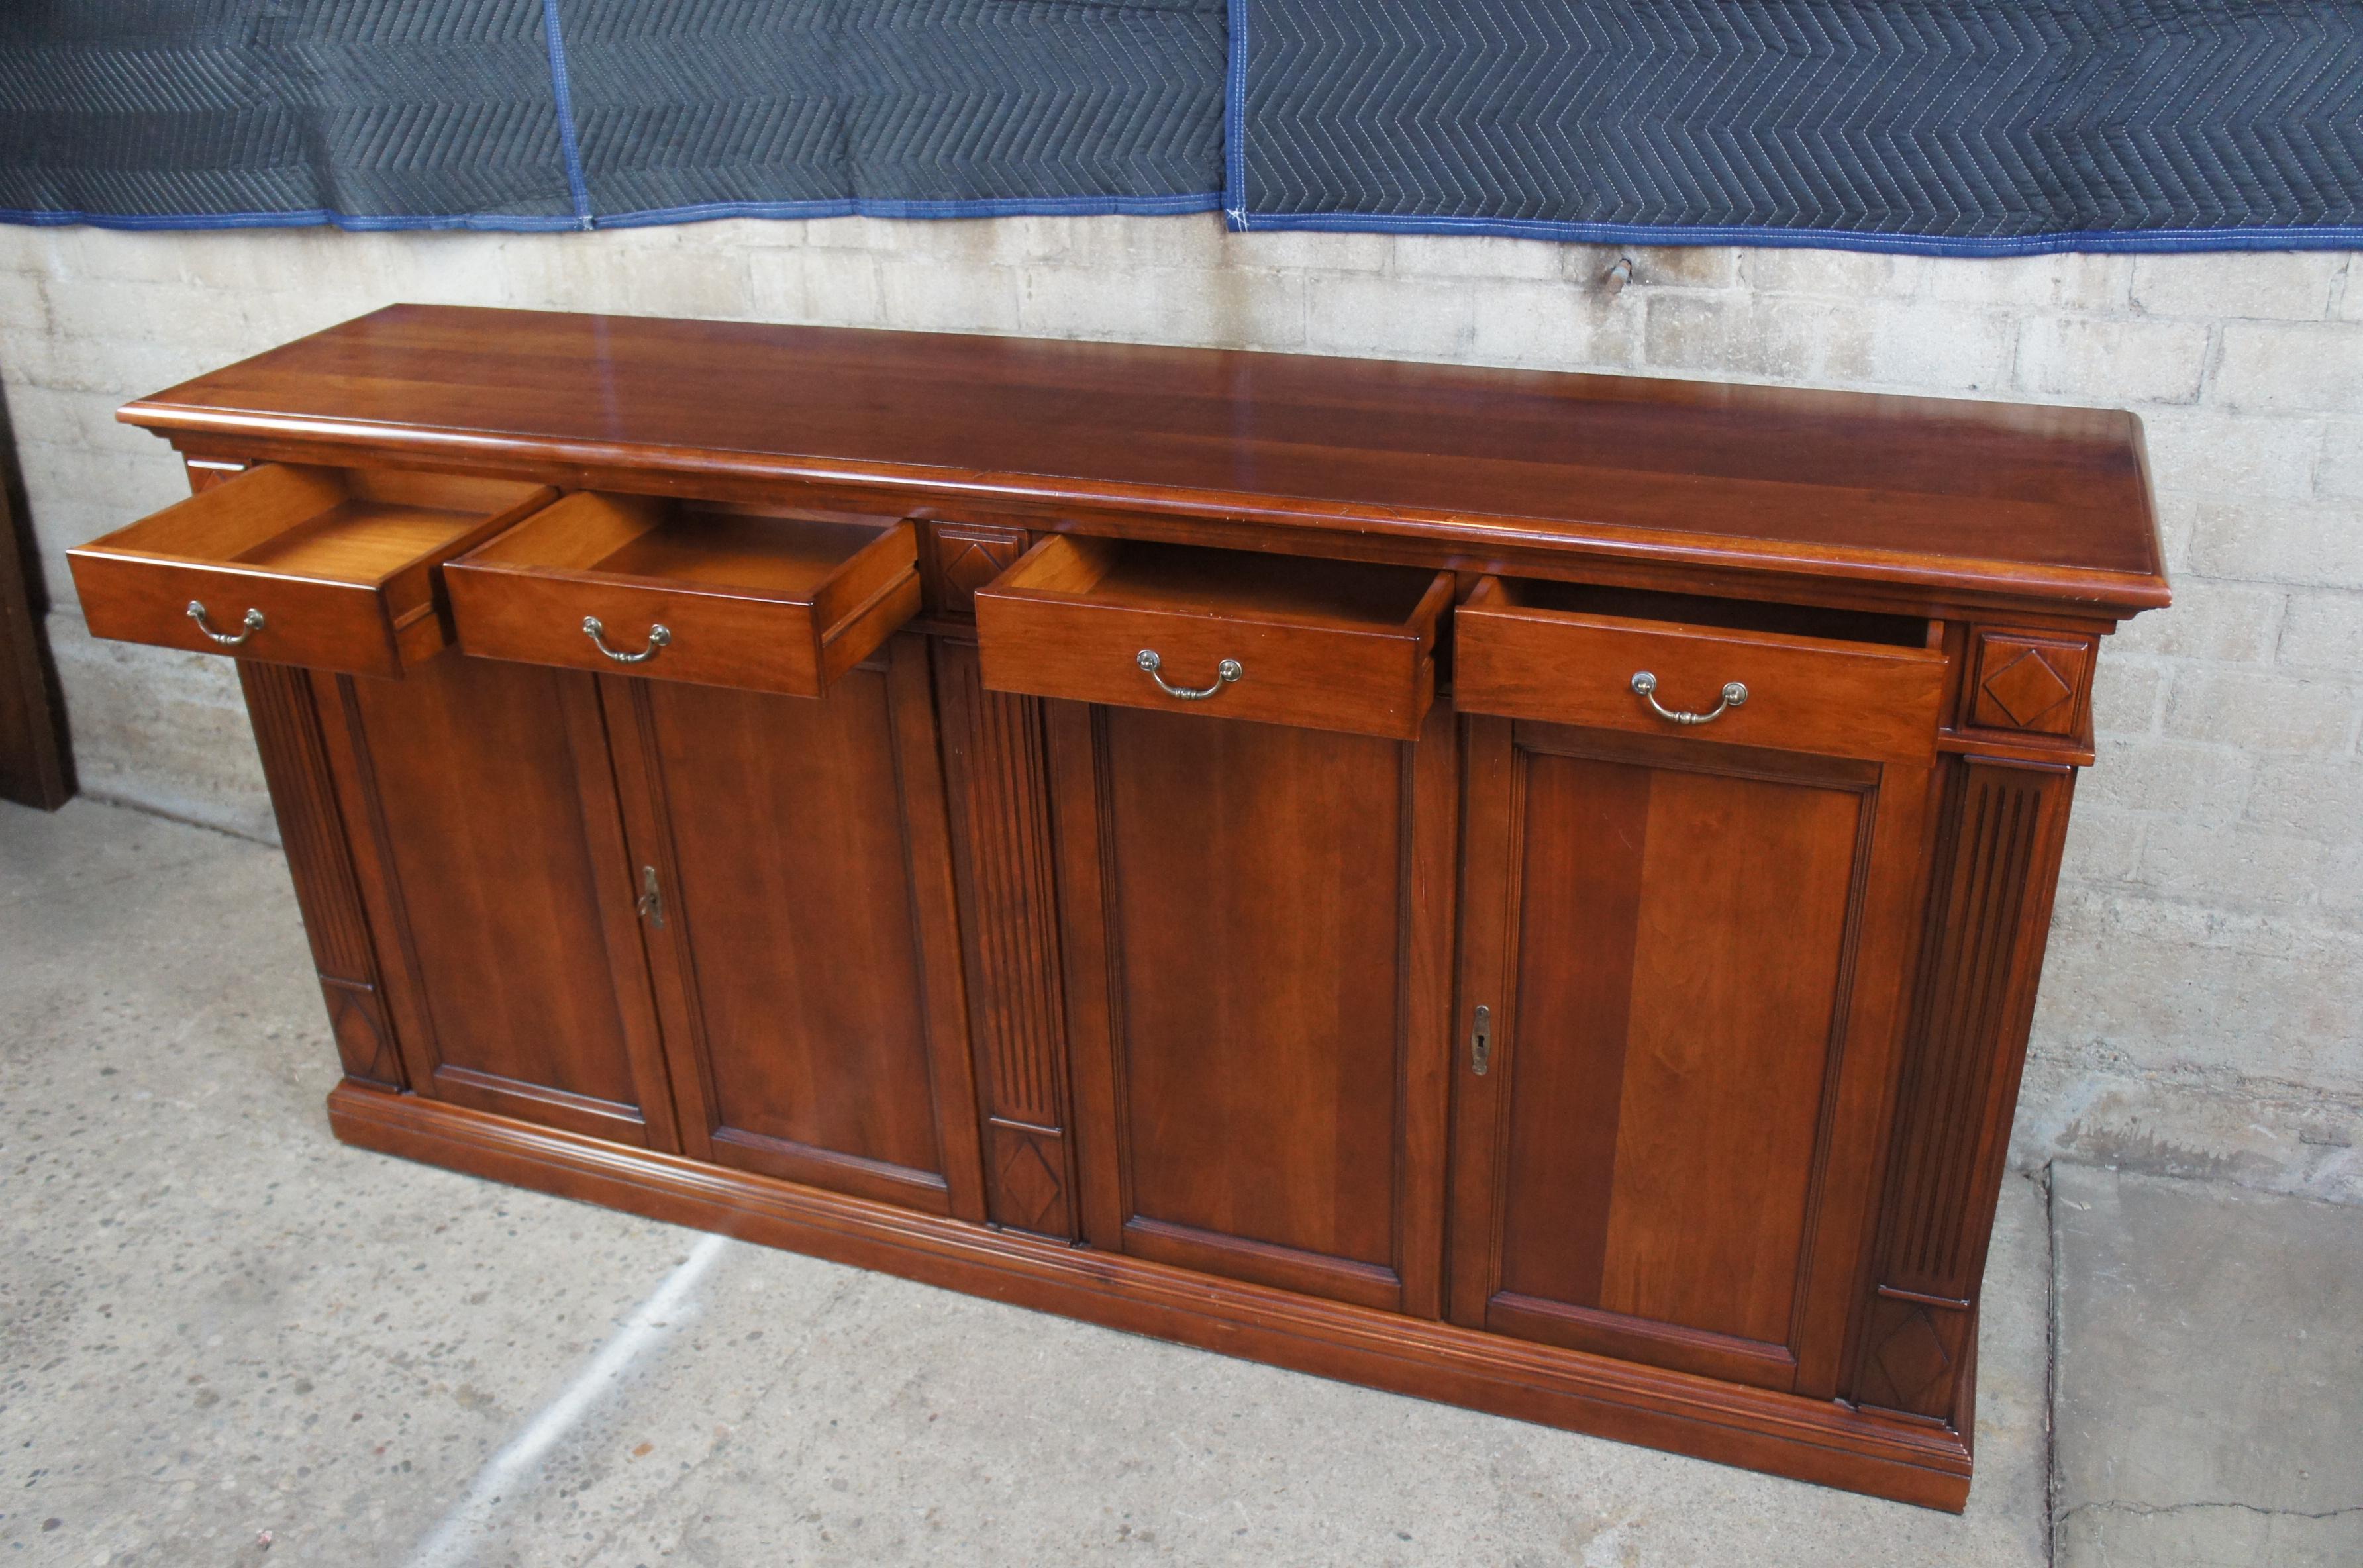 20th Century Traditional 4-Door Italian Cherry Console Cabinet Sideboard Buffet Credenza